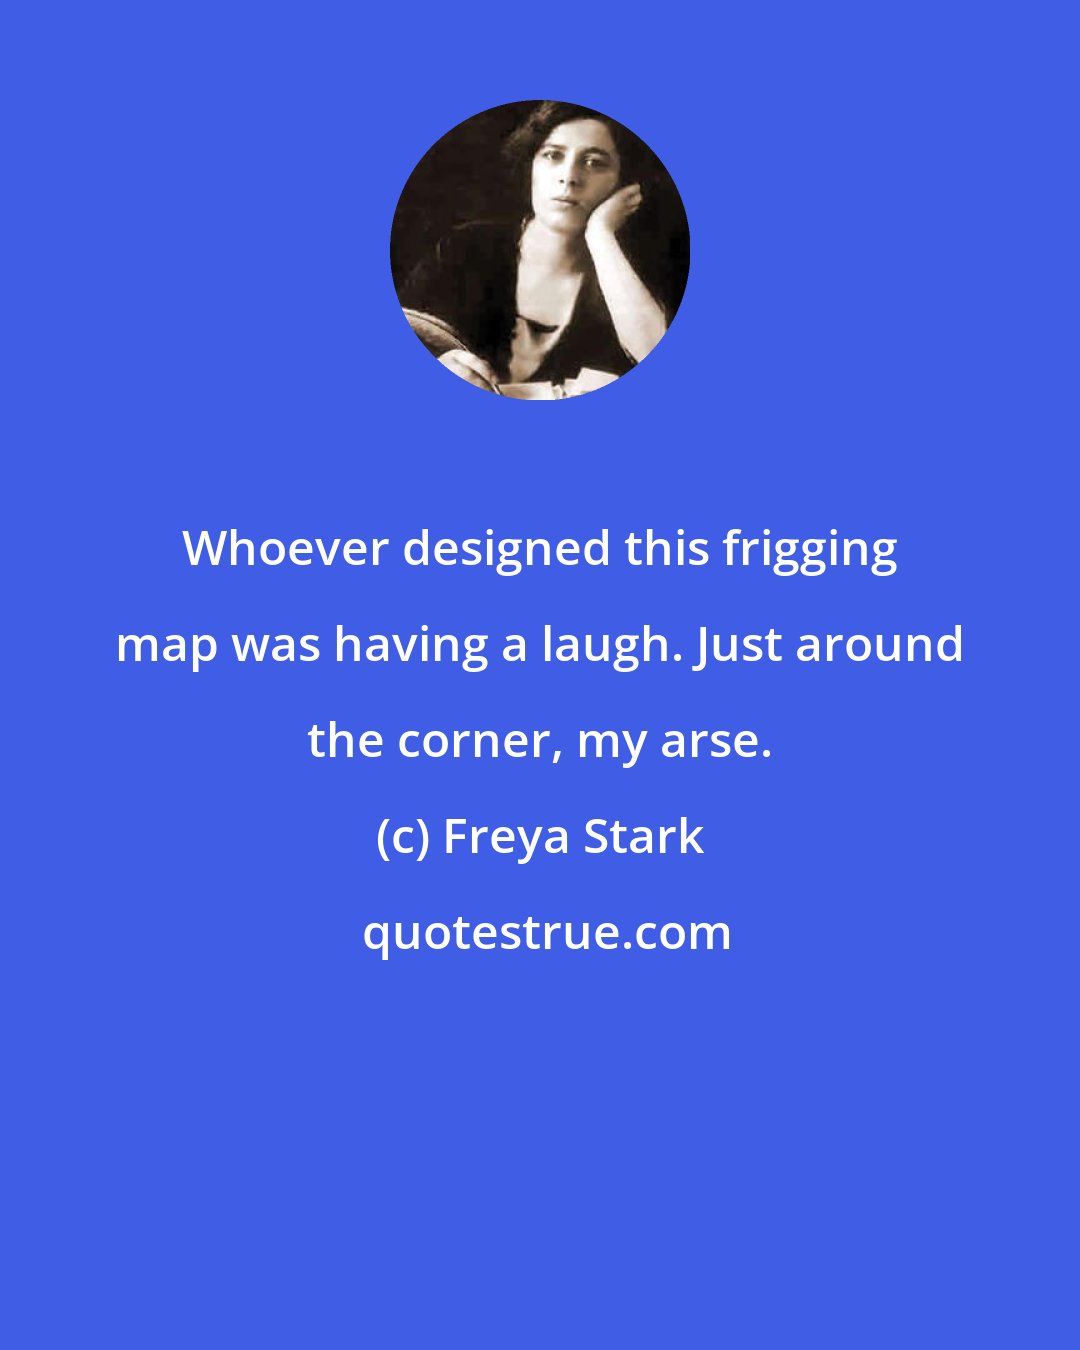 Freya Stark: Whoever designed this frigging map was having a laugh. Just around the corner, my arse.